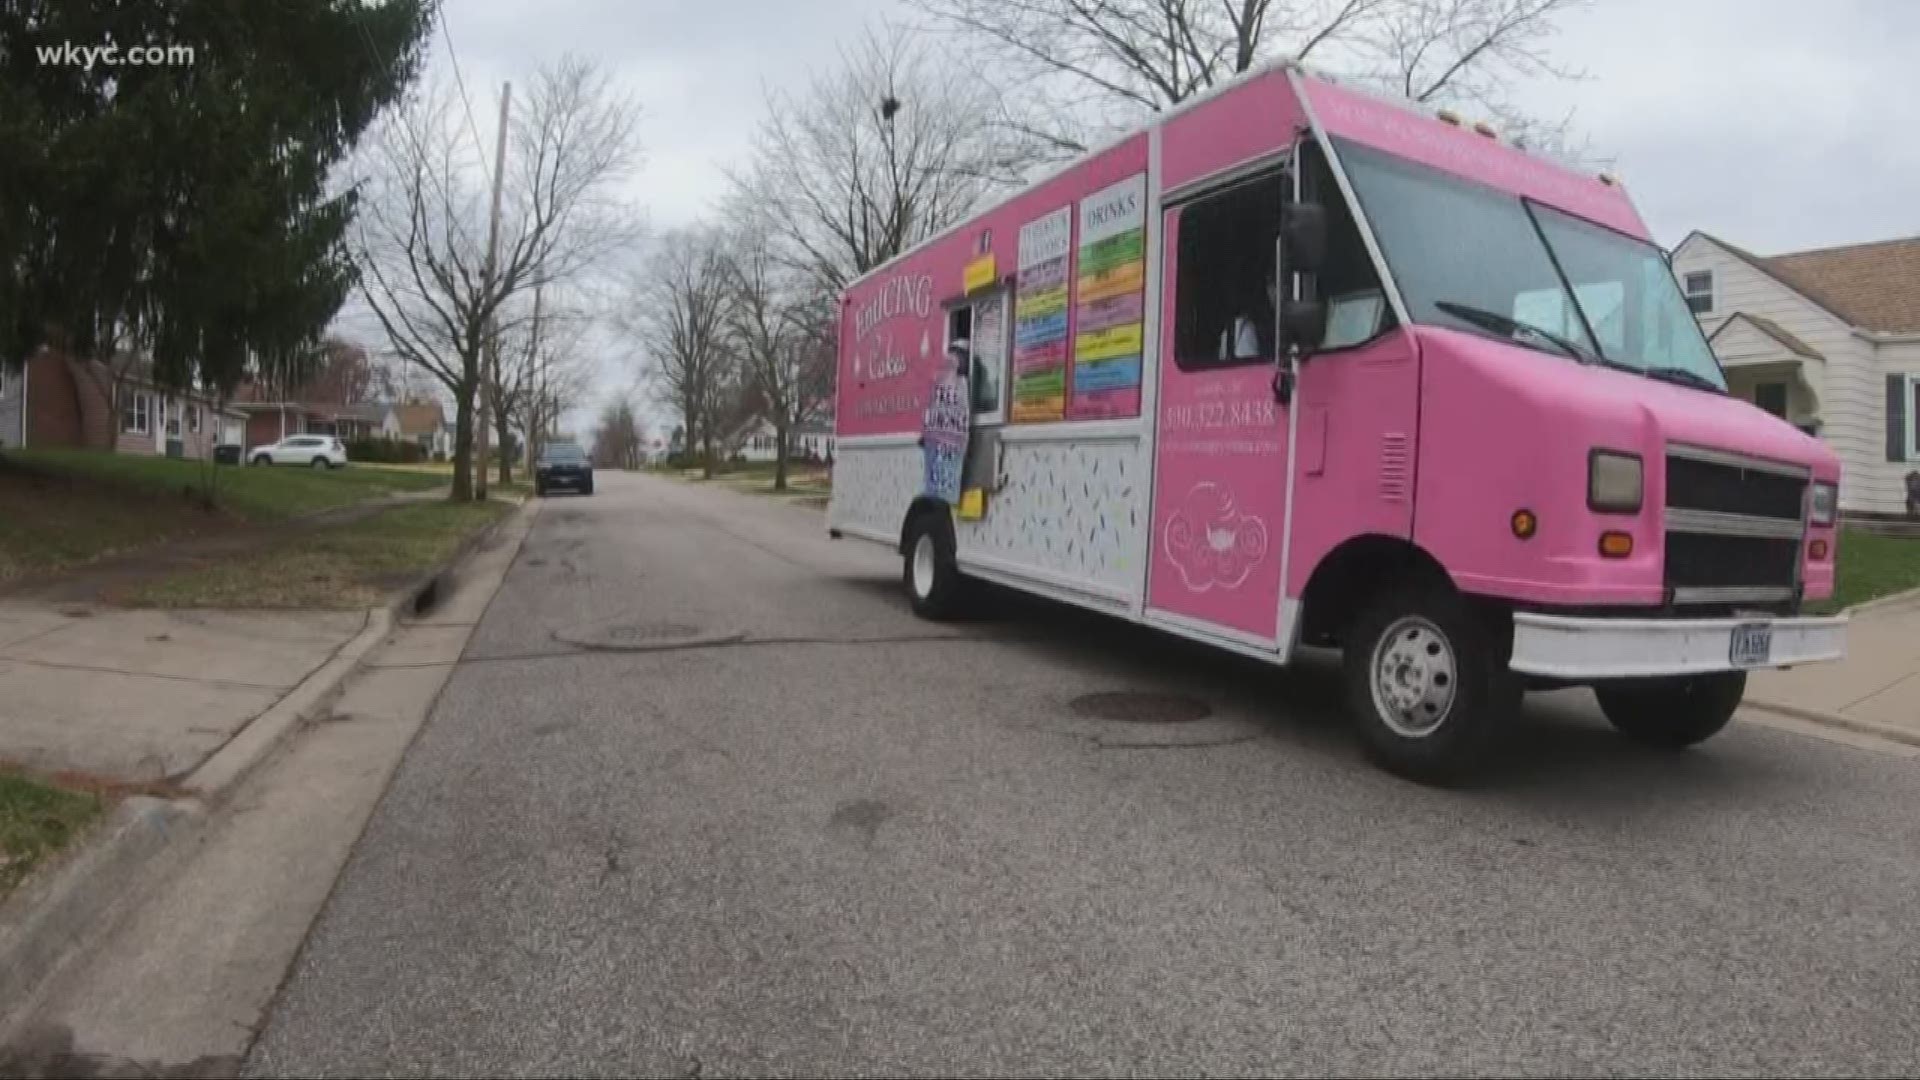 Will Ujek has the story of two women with time on their hands and compassion in their hearts. They're helping their community driving around in a big pink truck.